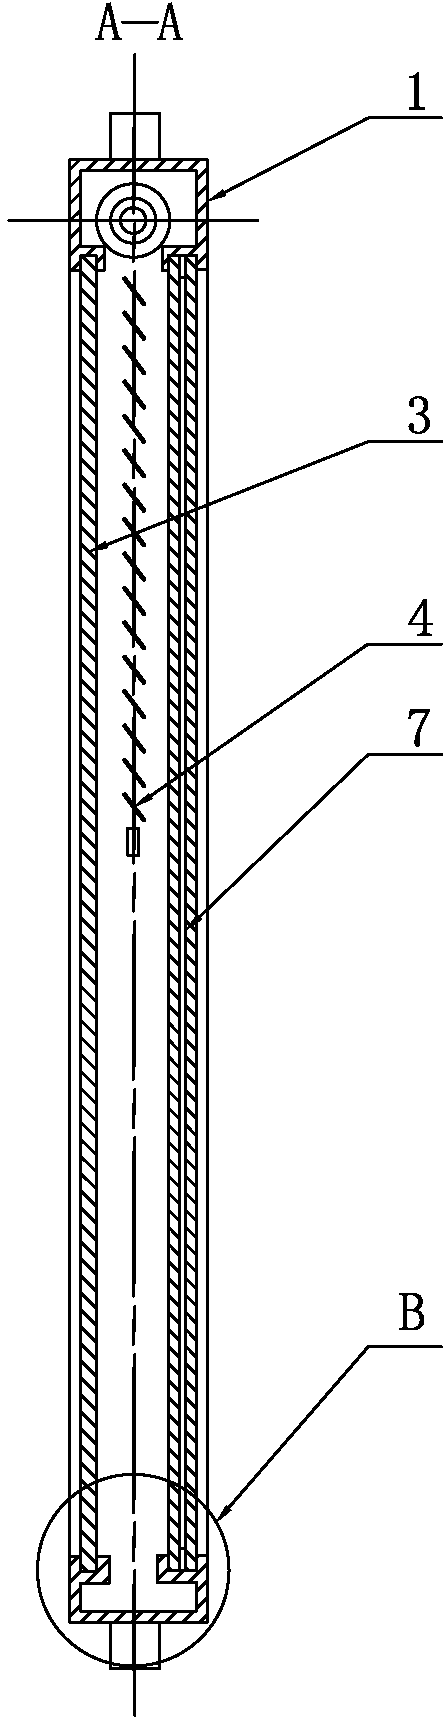 Composite vacuum glass with built-in shutters, and use method of composite vacuum glass